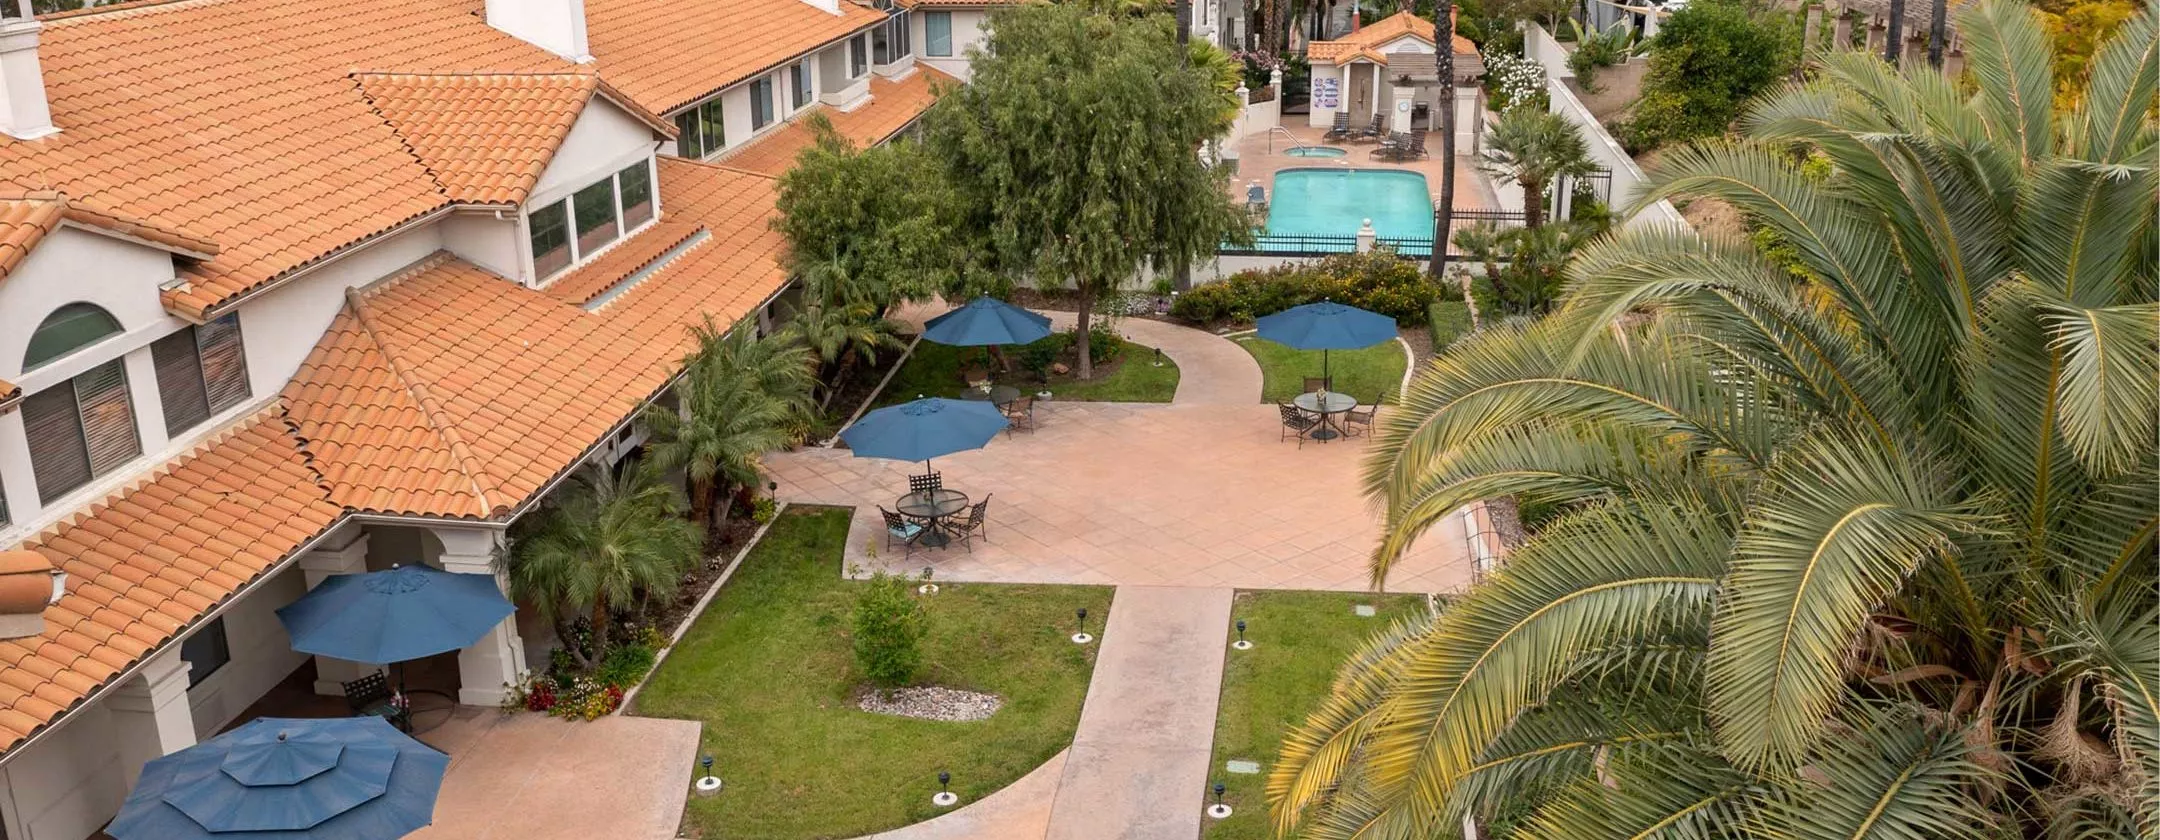 Aerial view of chino hills residence patio with blue umbrellas and pool